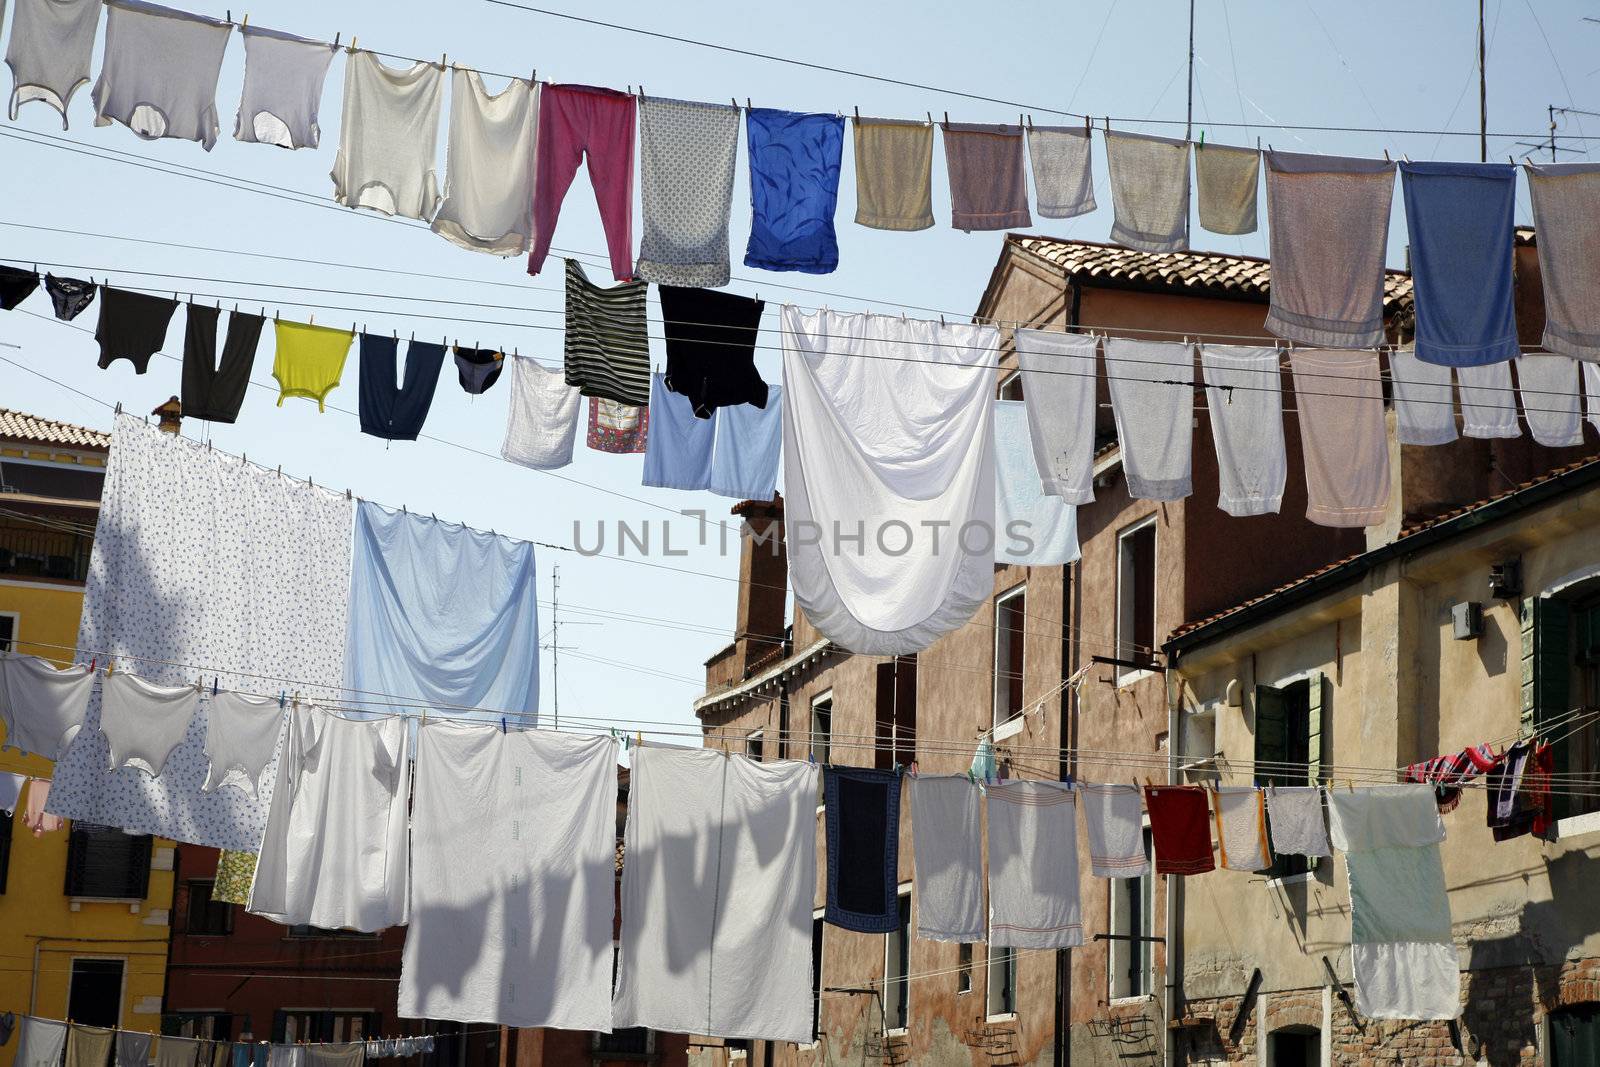 Washing day in Arsenale - Venice, Italy